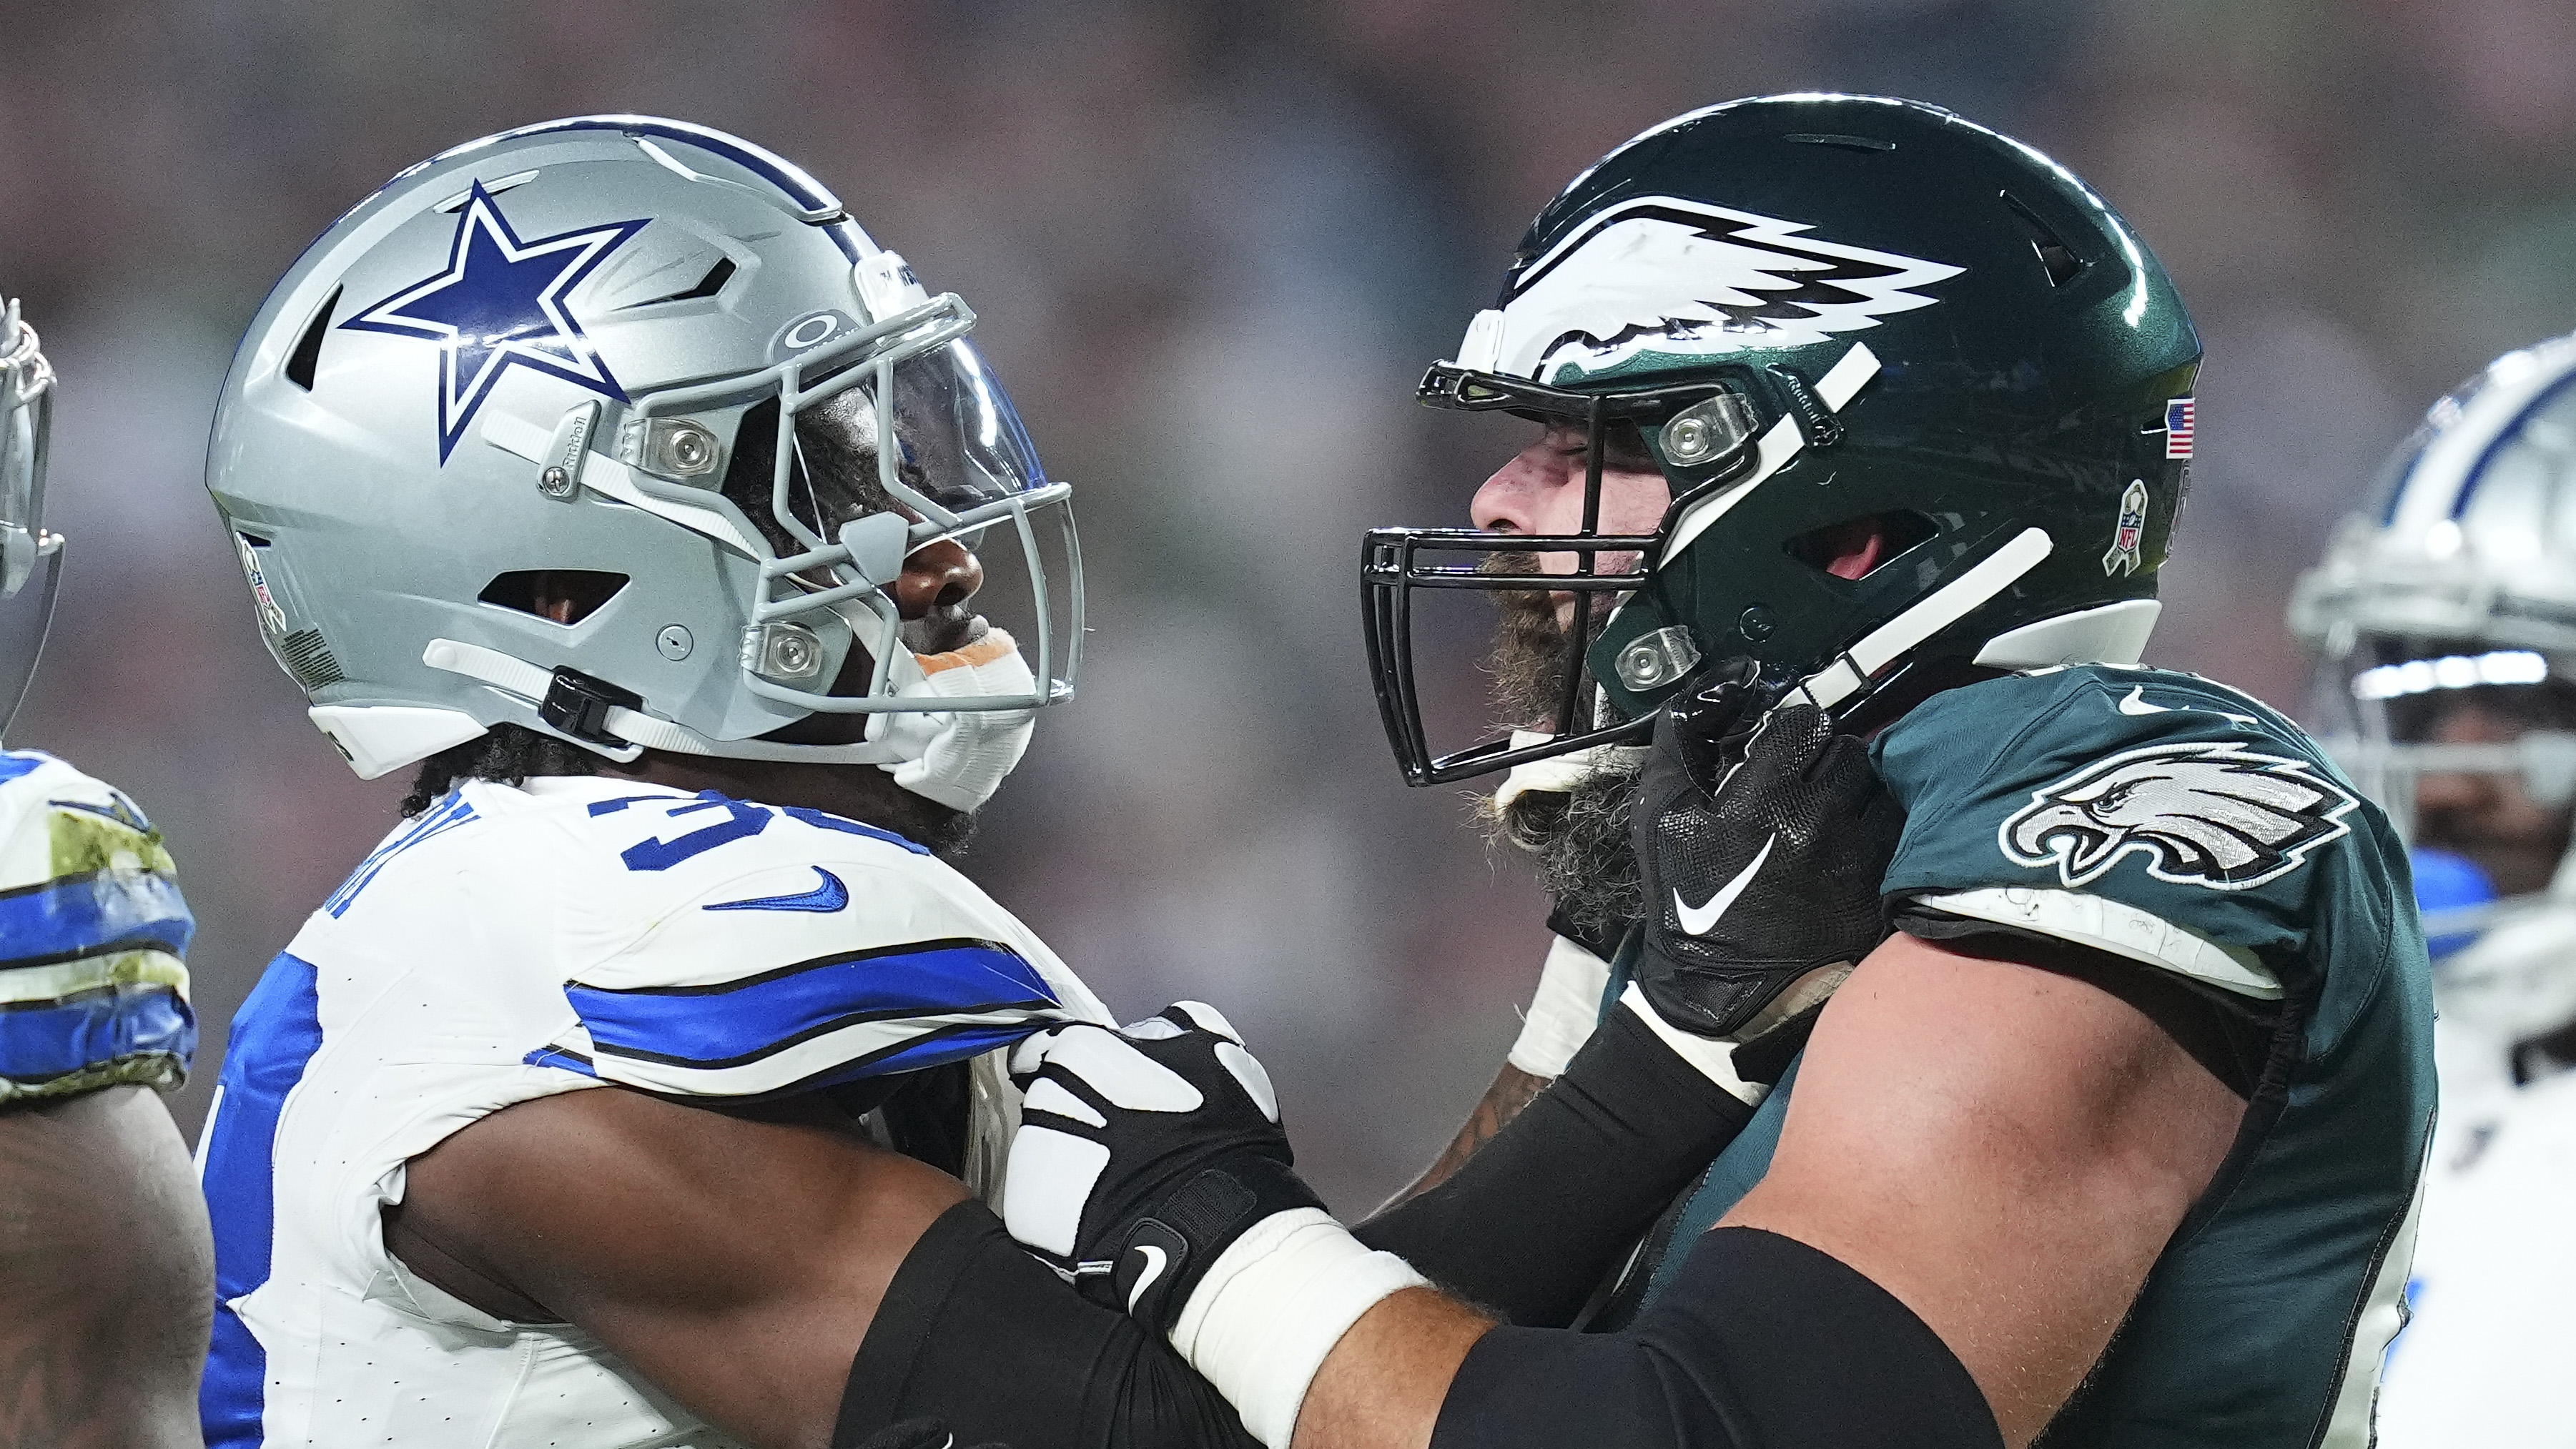 George Norcross Physically Removed From Eagles Game Over Israel Support